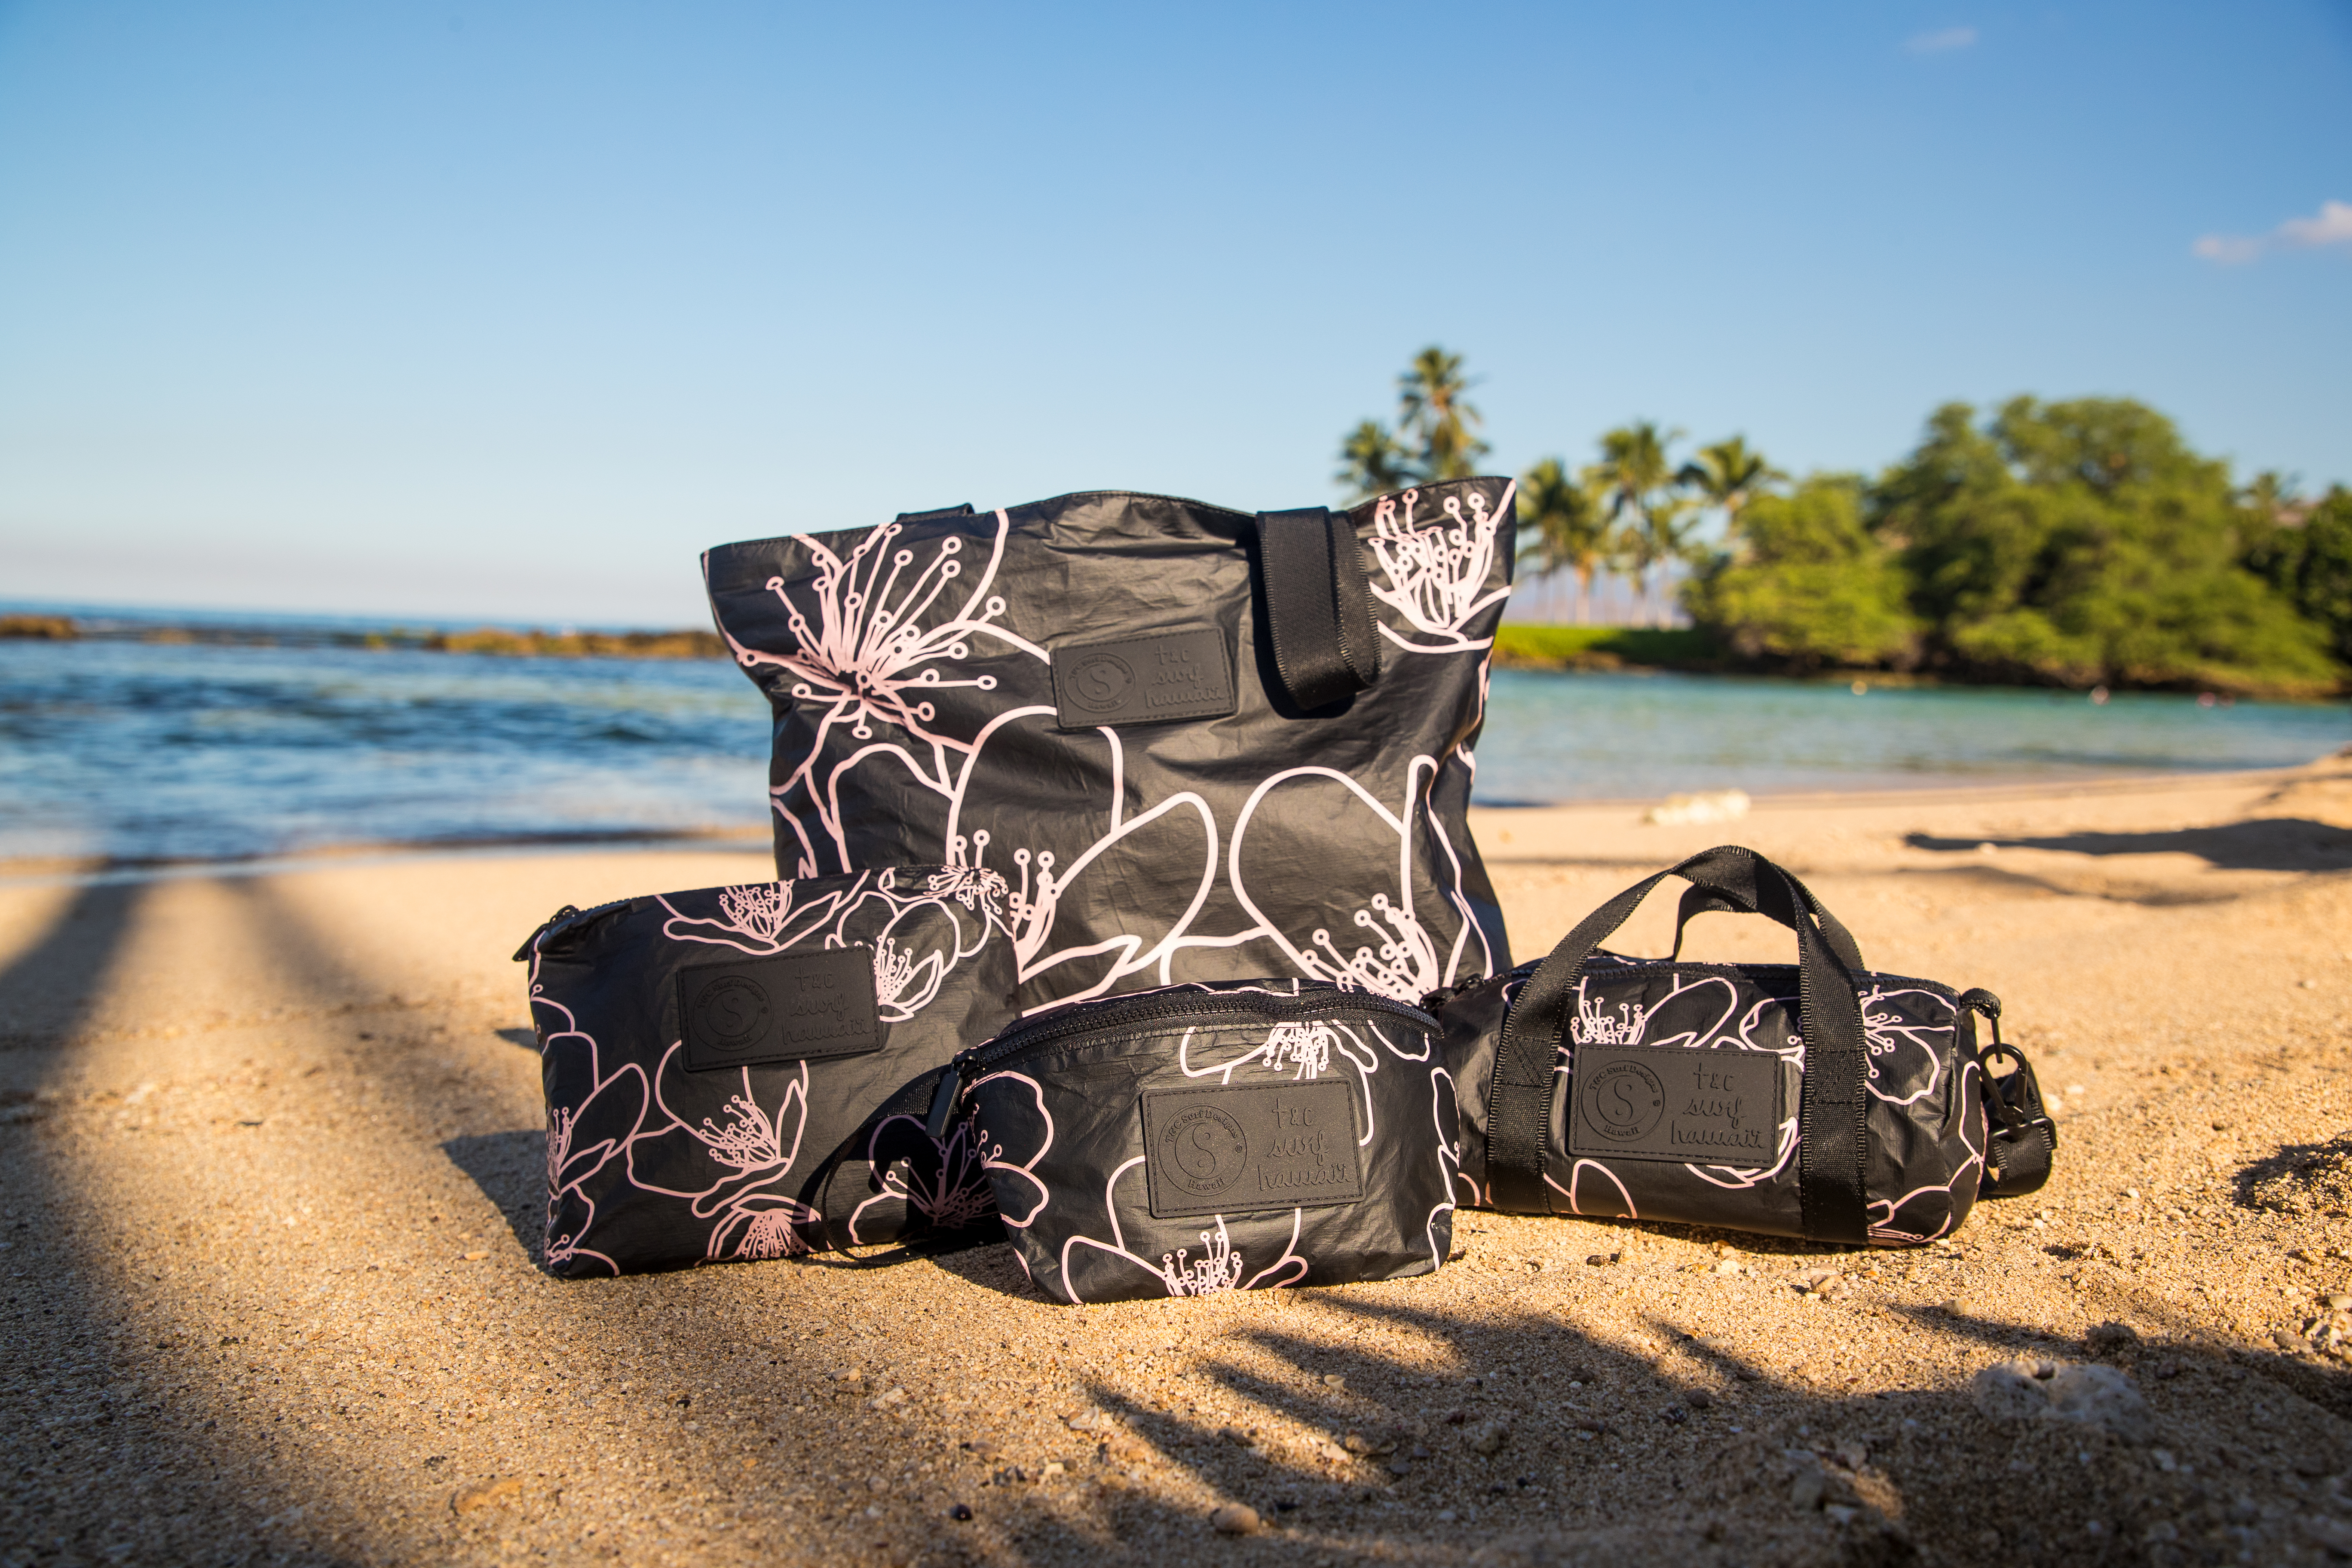 T&C Surf x Aloha Collection from T&C Surf Designs